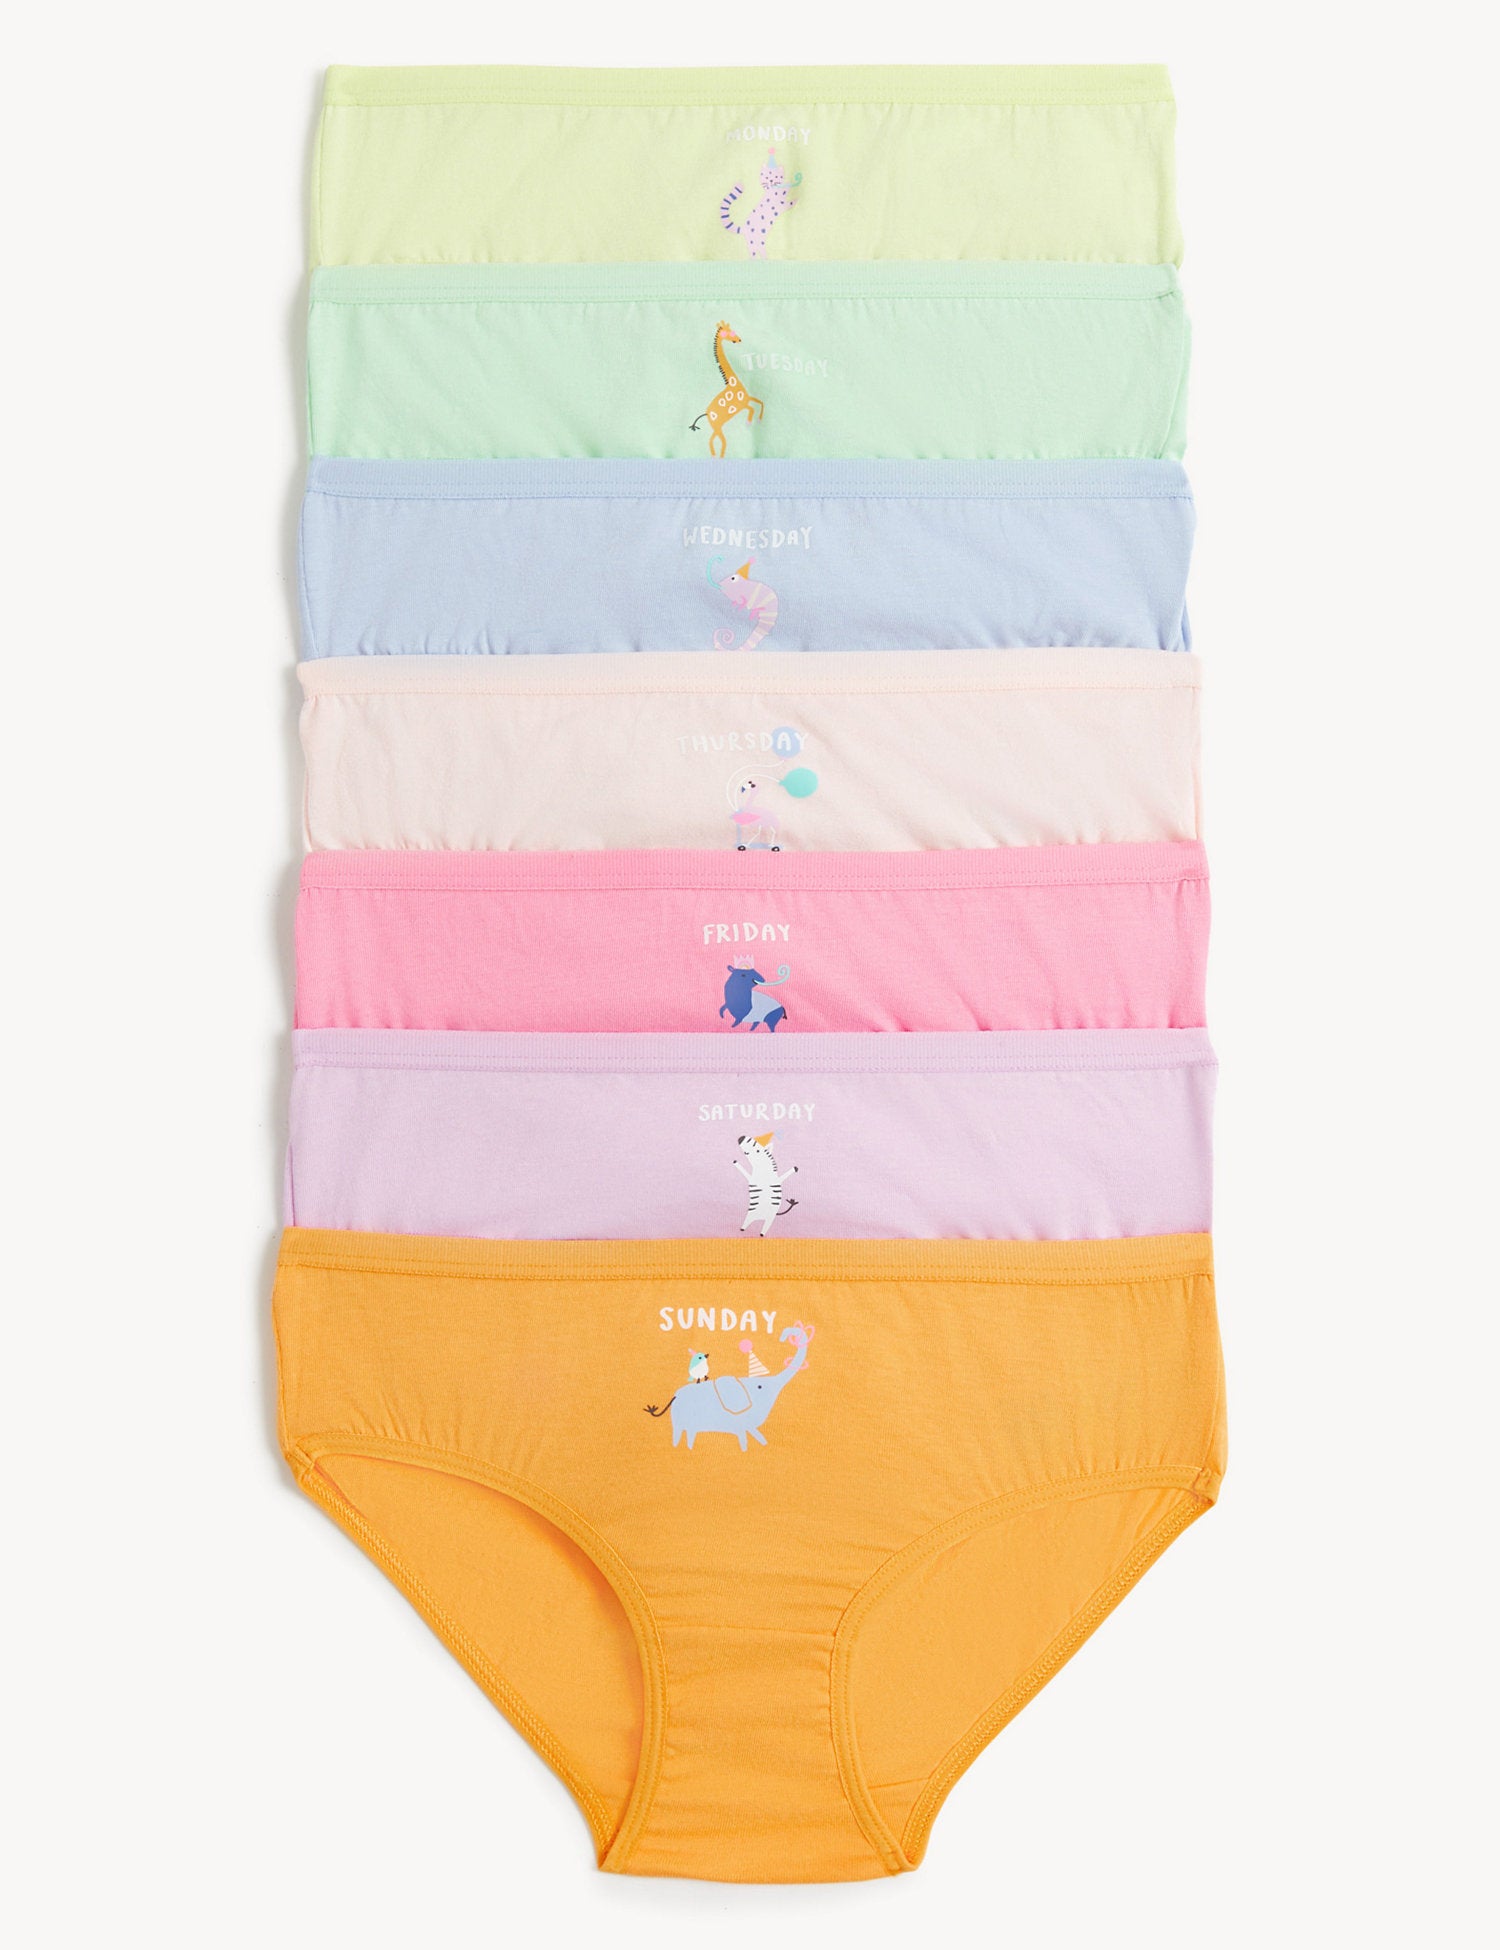 days of the week panties  Channo girls' knickers cotton for each day of  the week. Soft and comfortable fabric.